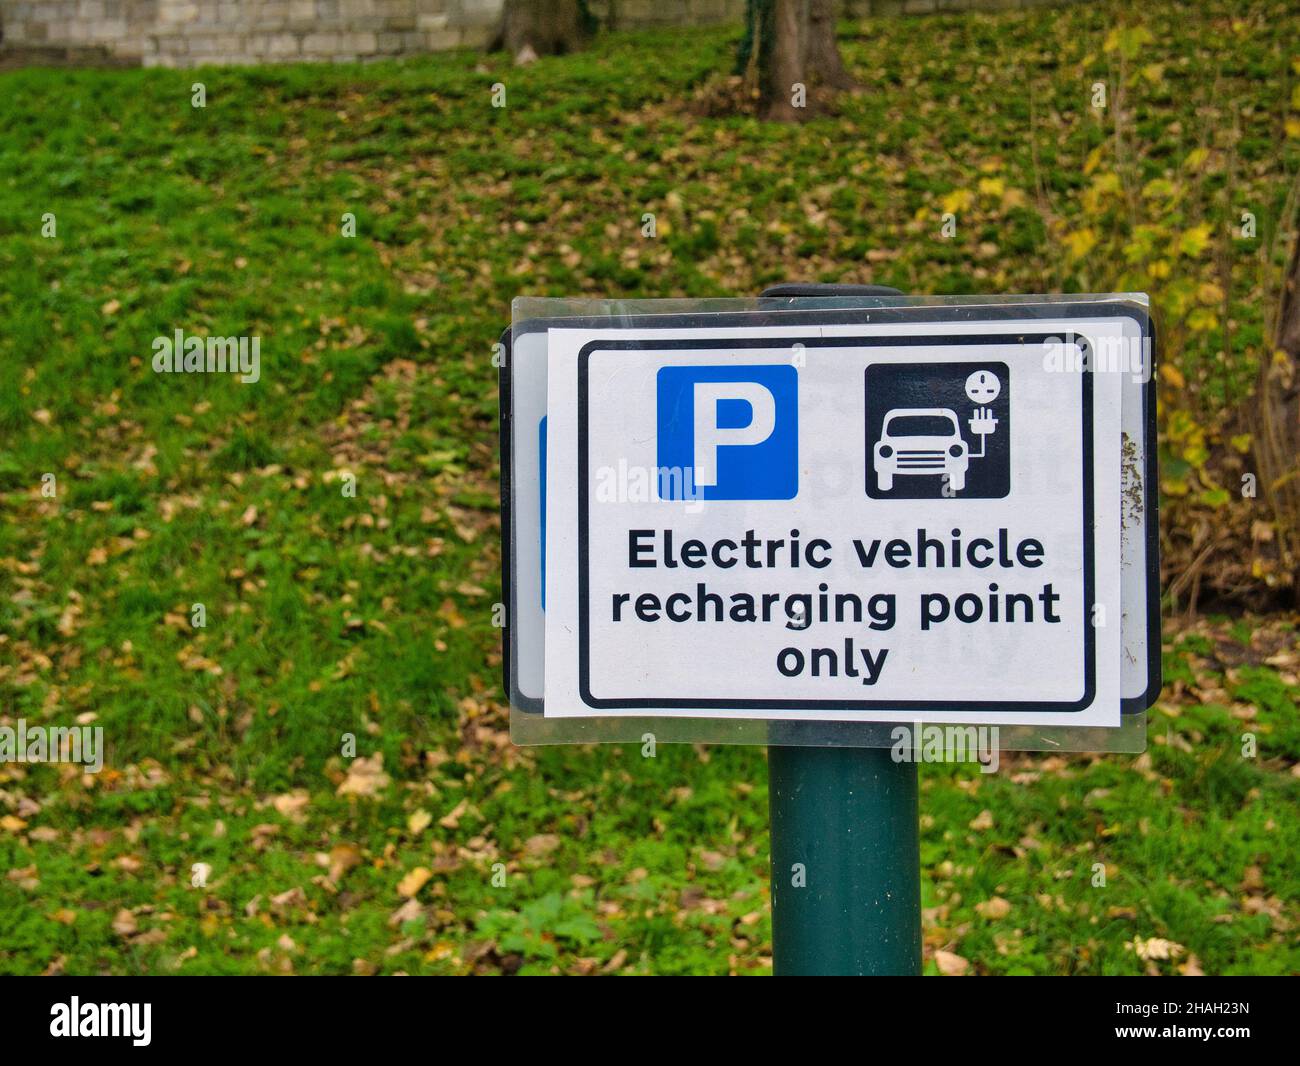 A rectangular sign in a town car park shows a parking bay reserved for electric vehicle charging only. Stock Photo